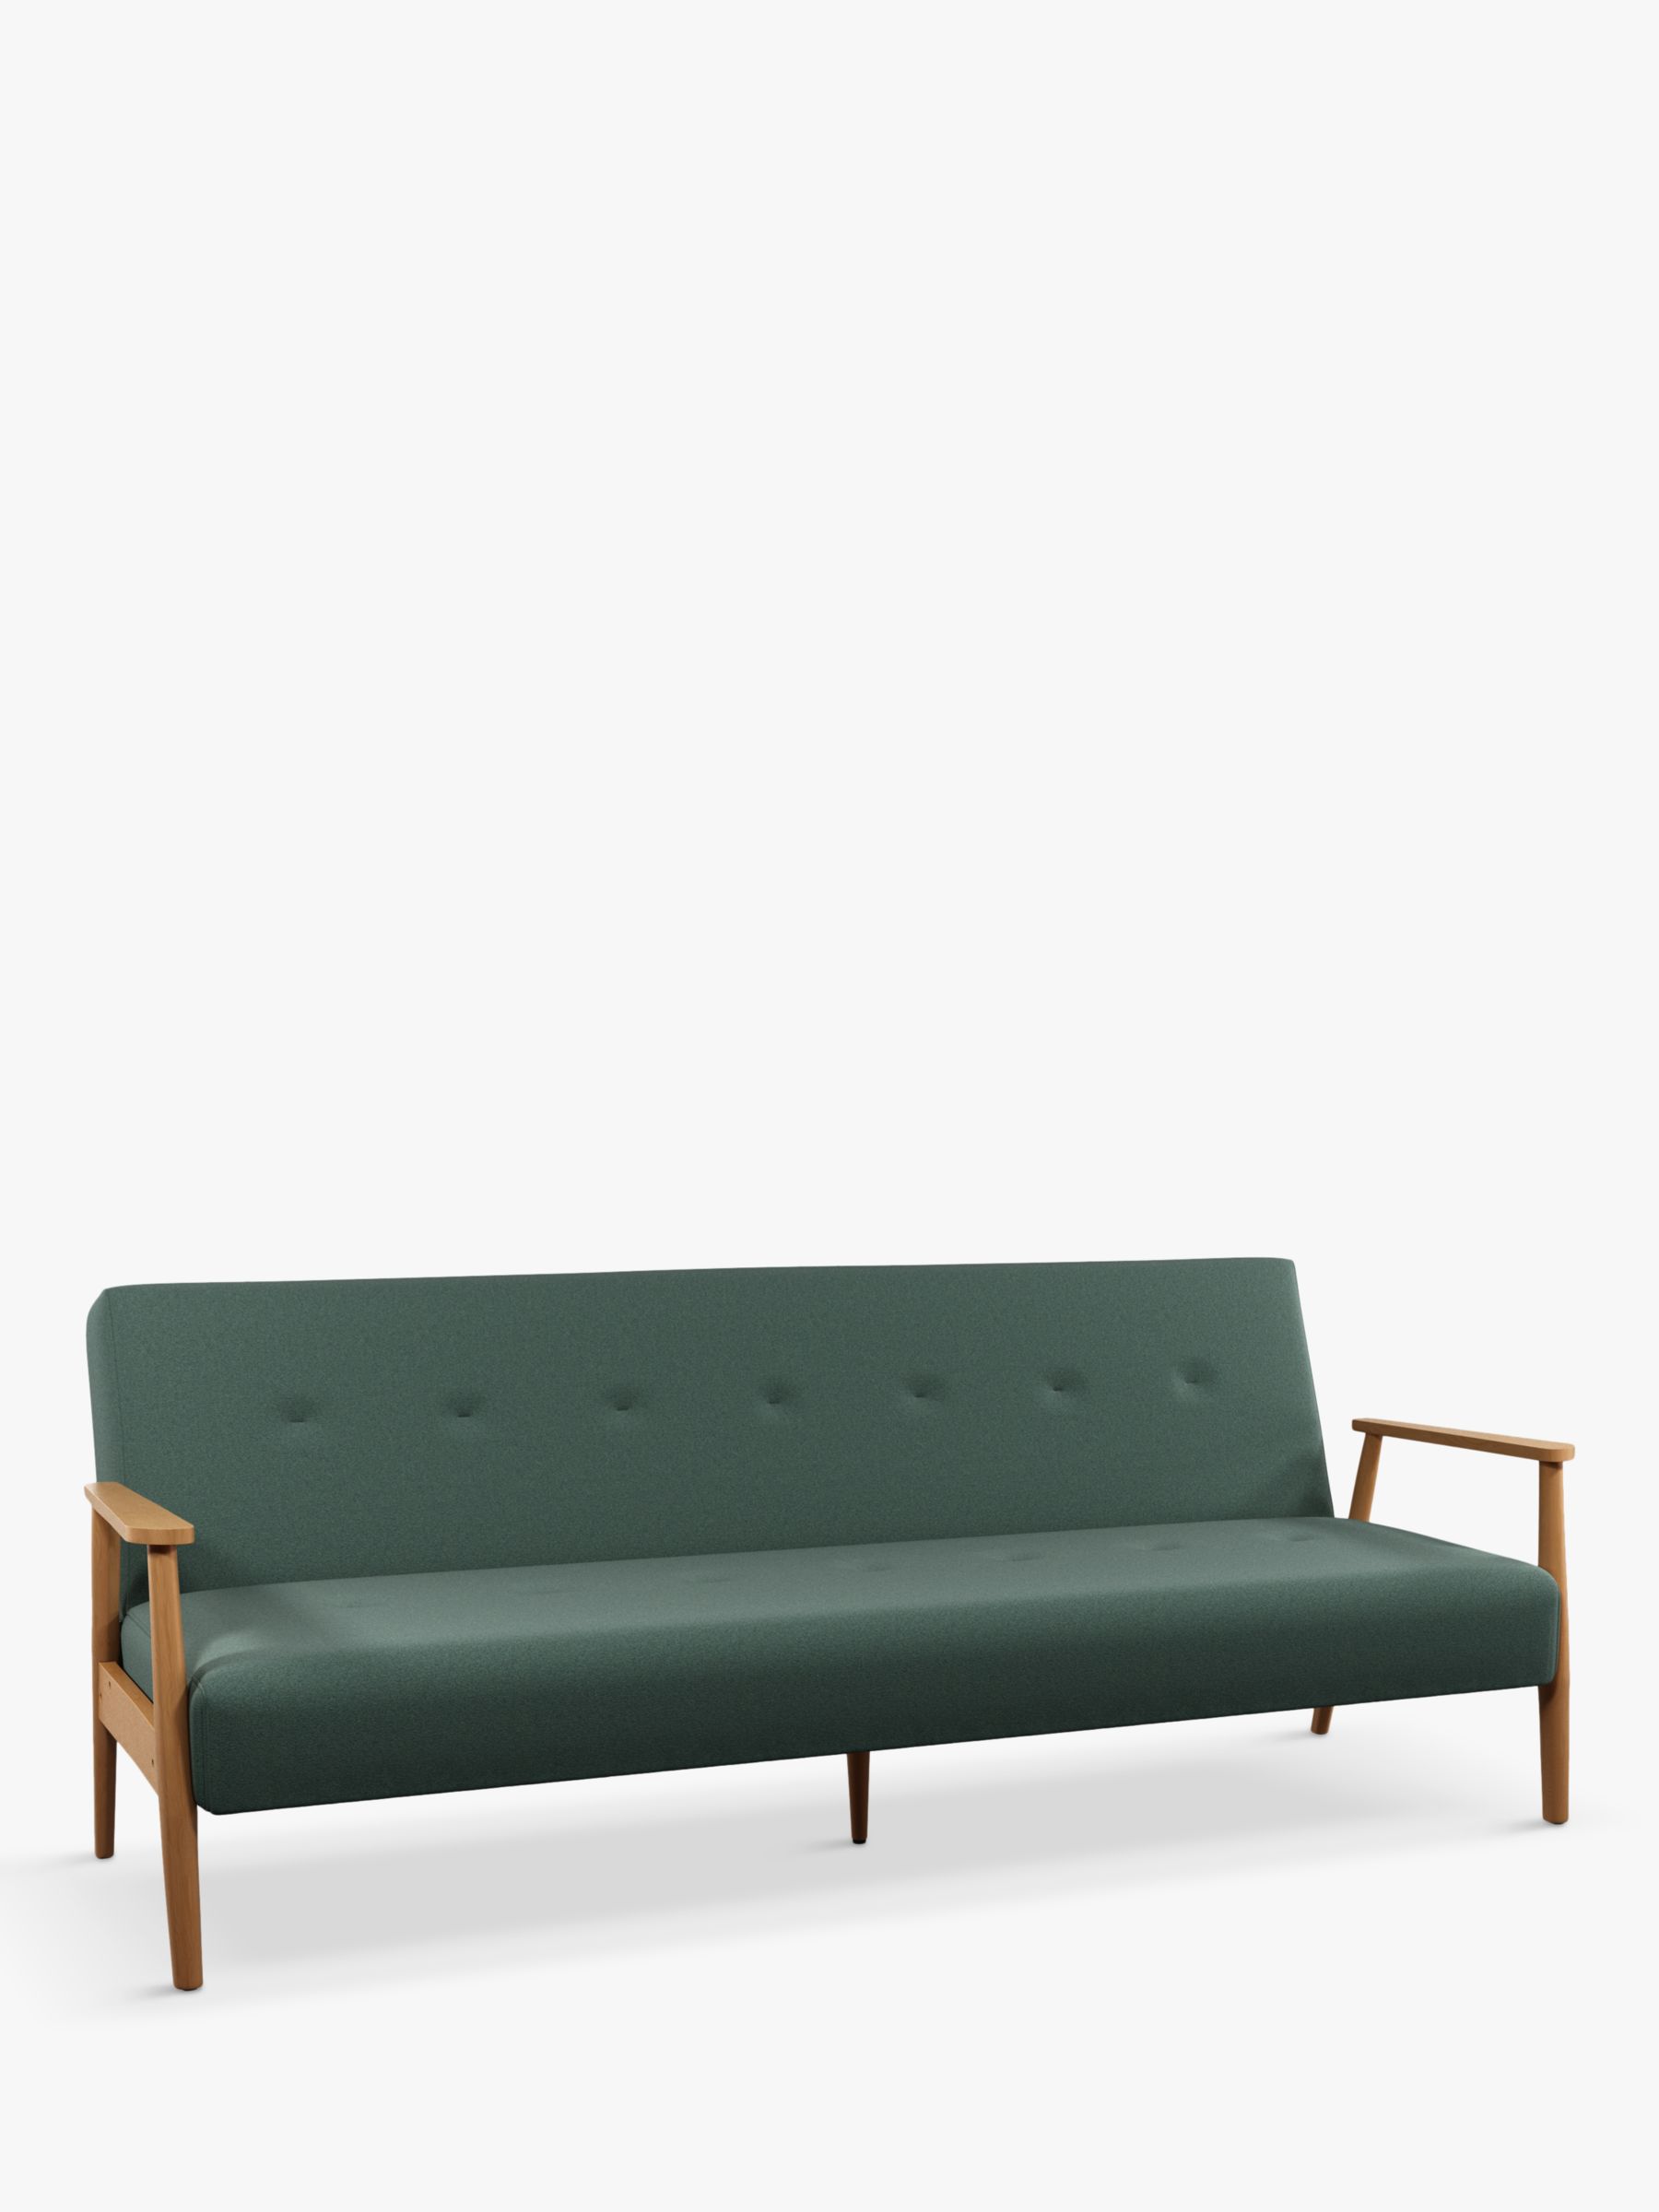 Photo of John lewis anyday show wood bench large 3 seater sofa bed light leg cord green